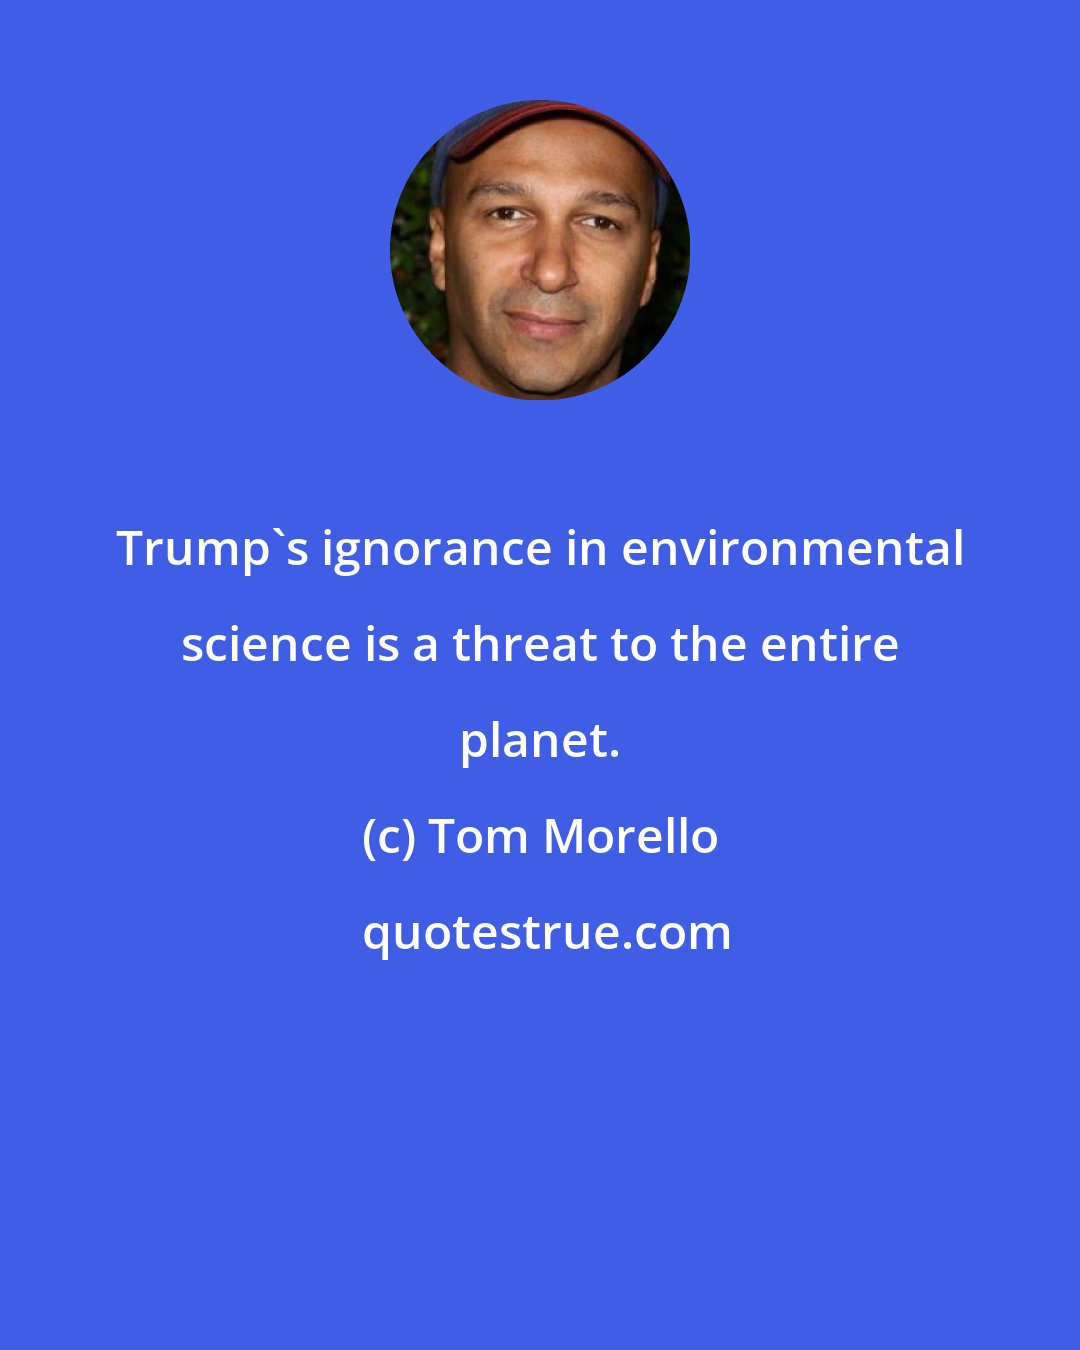 Tom Morello: Trump's ignorance in environmental science is a threat to the entire planet.